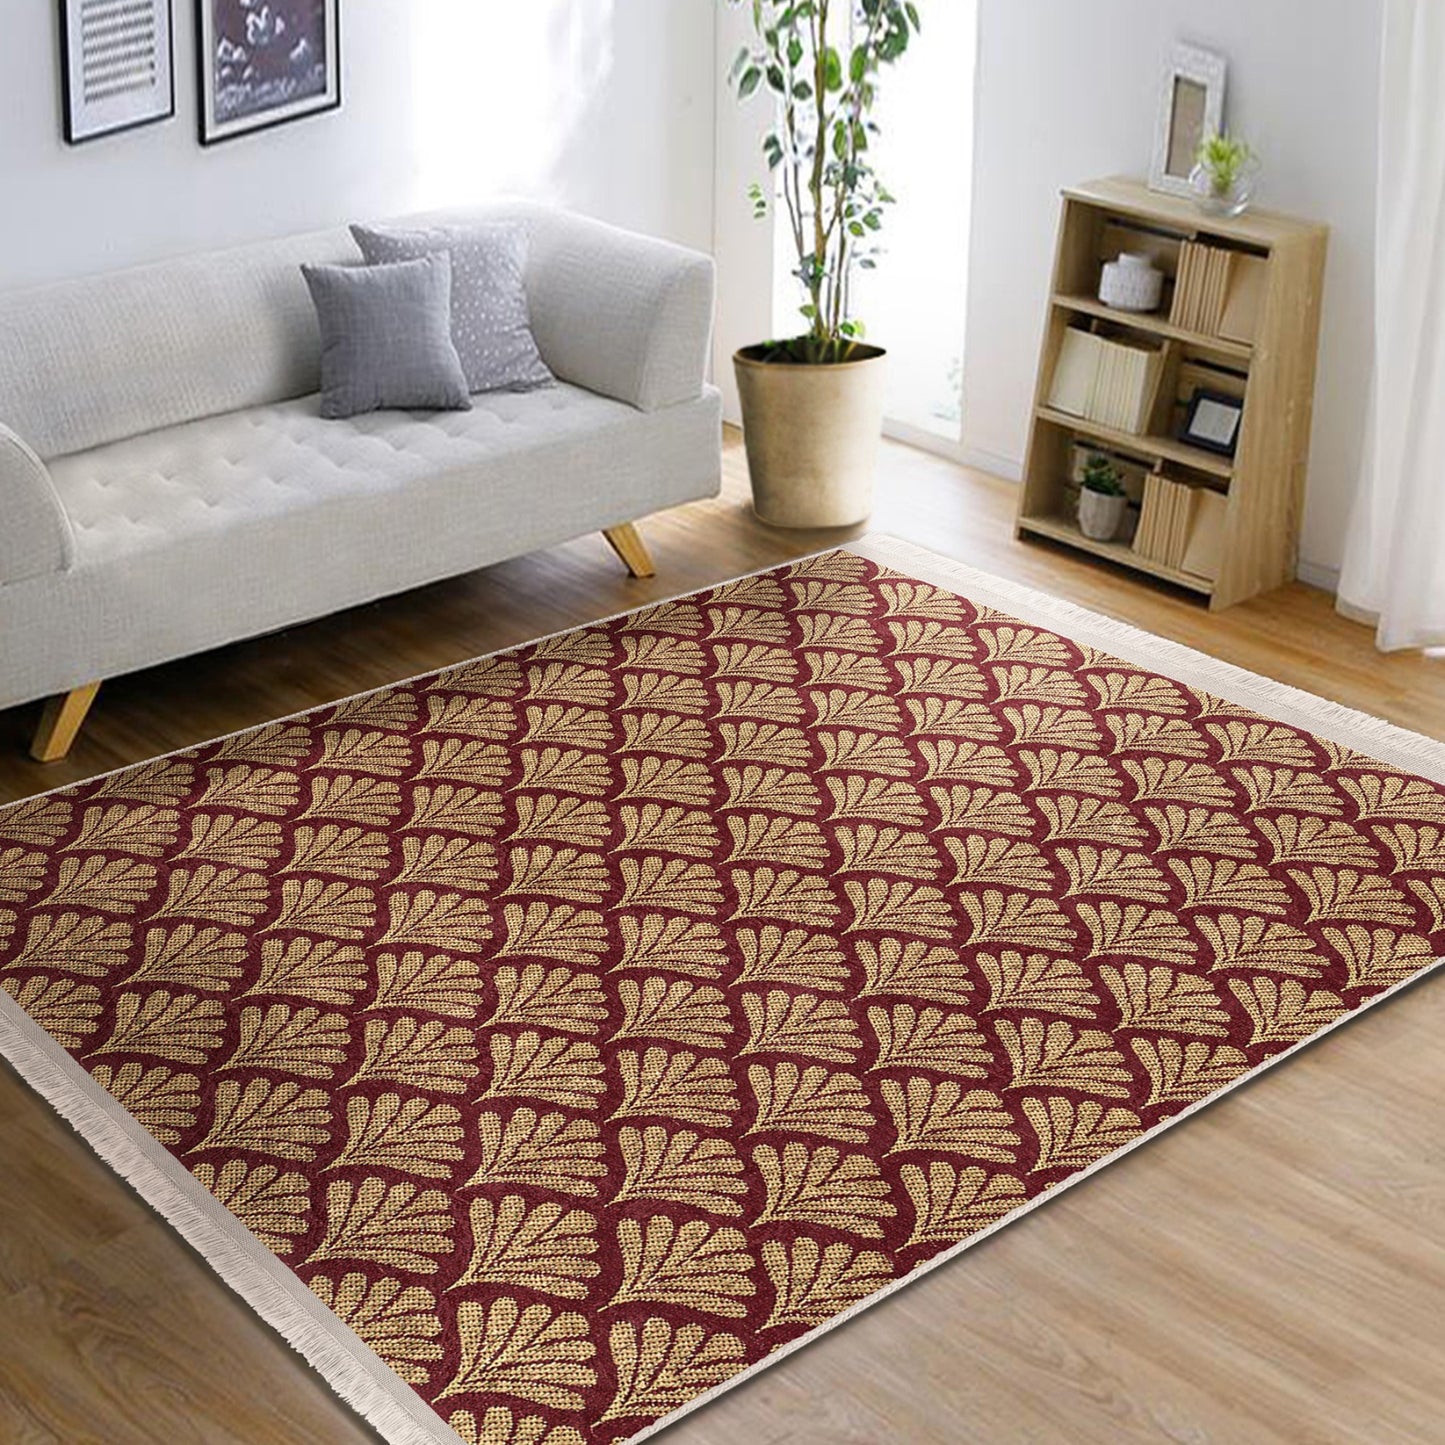 Elegant Rug with Leaf and Gold Motif for Exquisite Home Decor